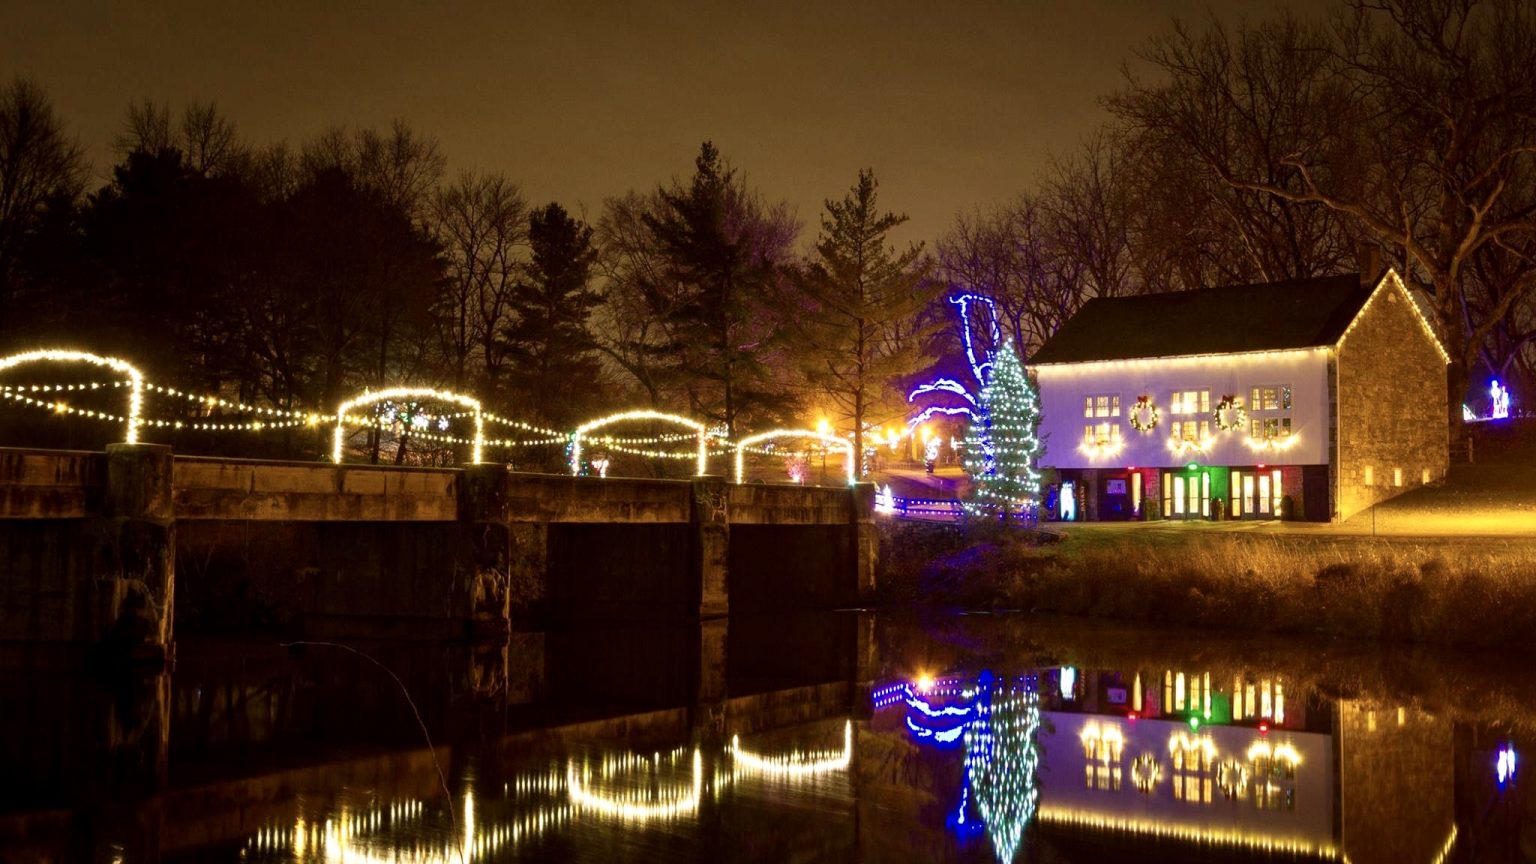 Holiday Lights at Gring’s Mill to feature music, food, and fun